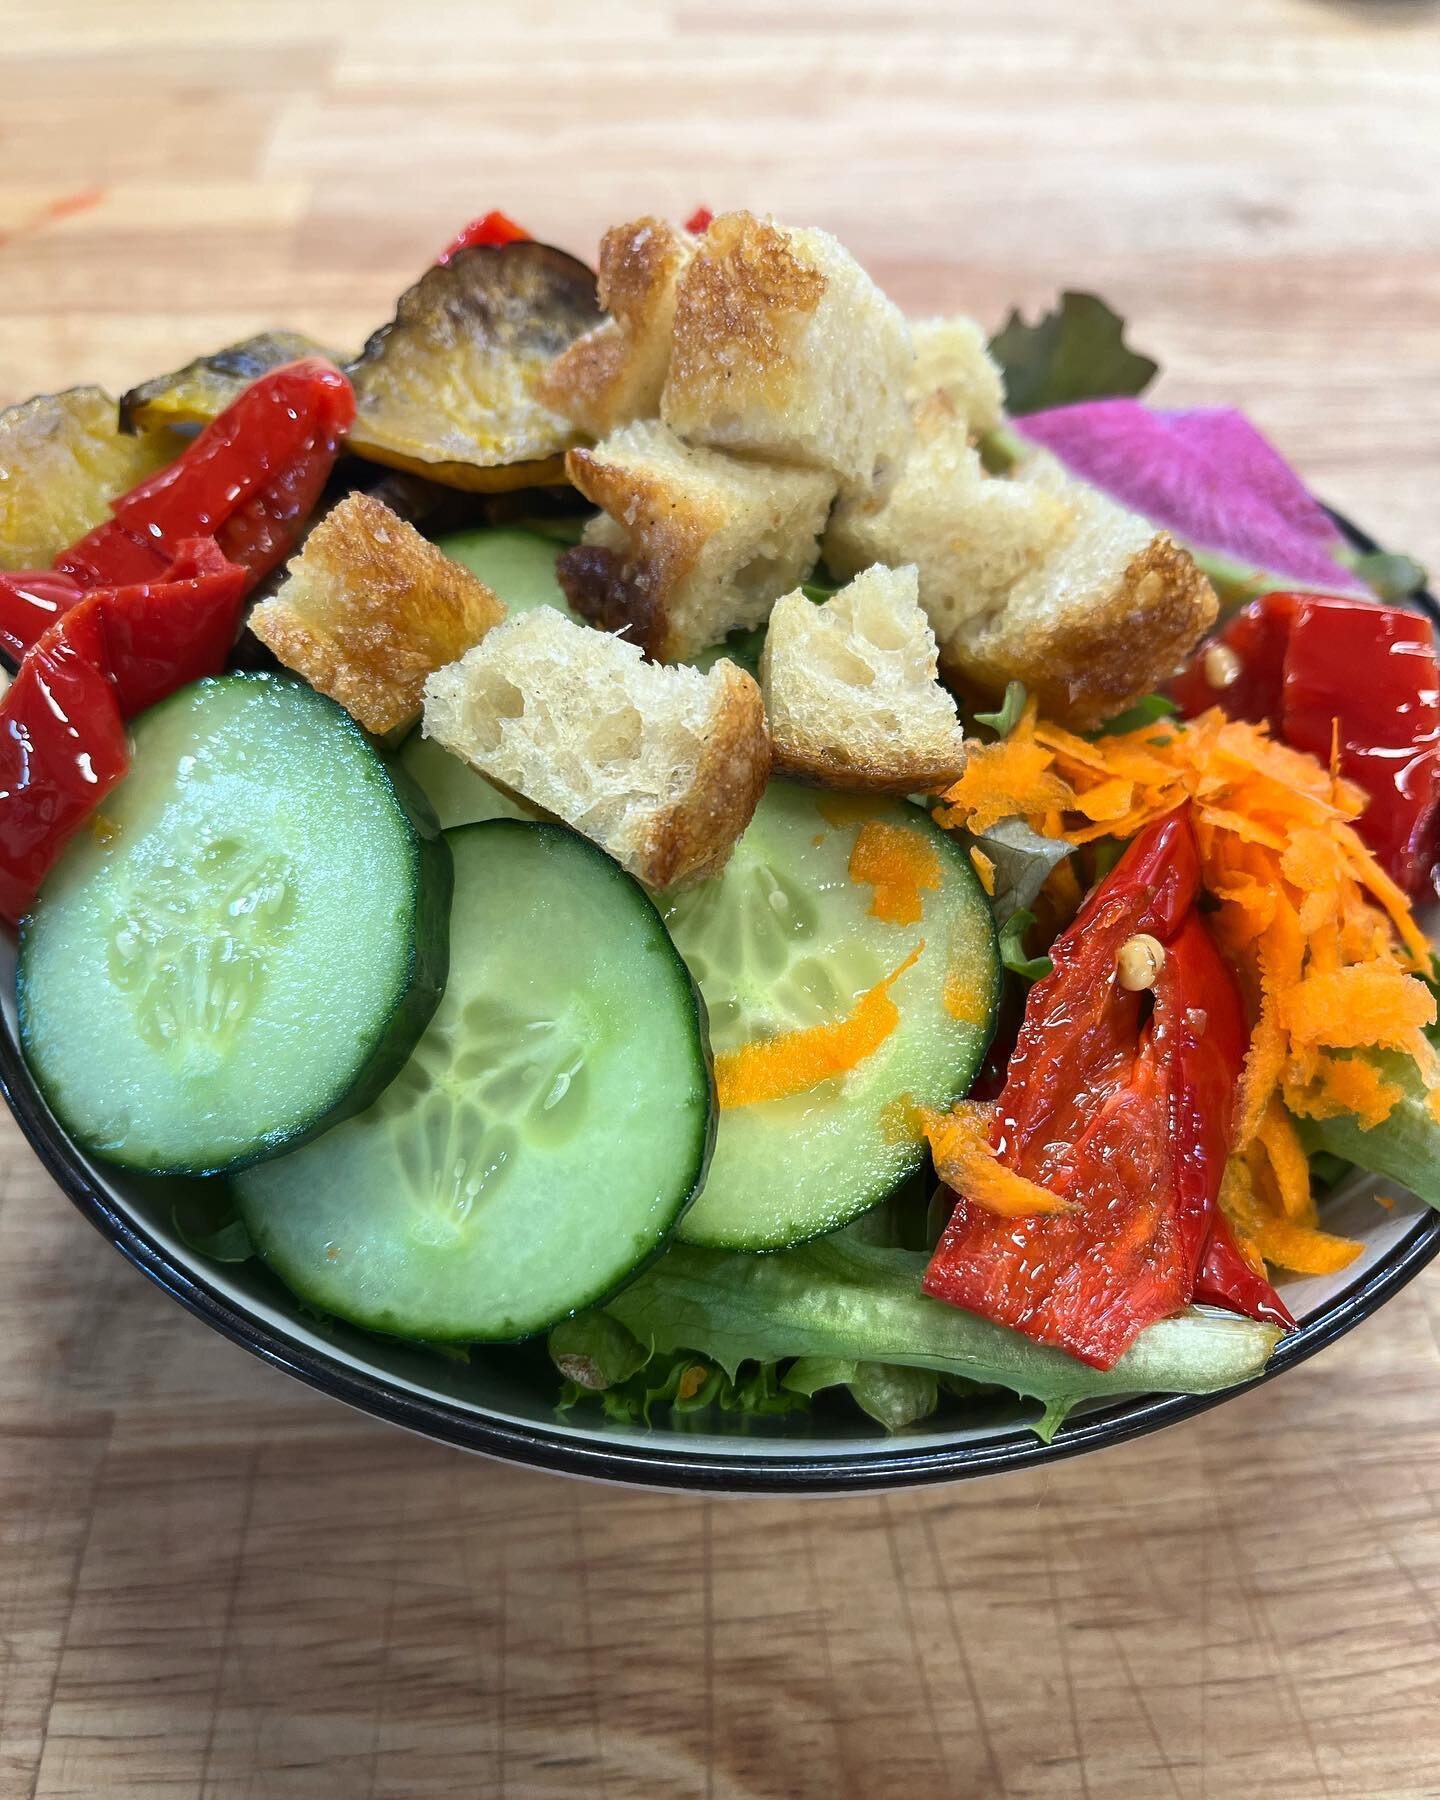 Along with all our sweet and savory baked treats and bread, we also have our salad 🥗 You can add additional protein to it and we just baked our first round of croutons! They&rsquo;re so good, using leftover focaccia 🍞 we&rsquo;re open today and tom